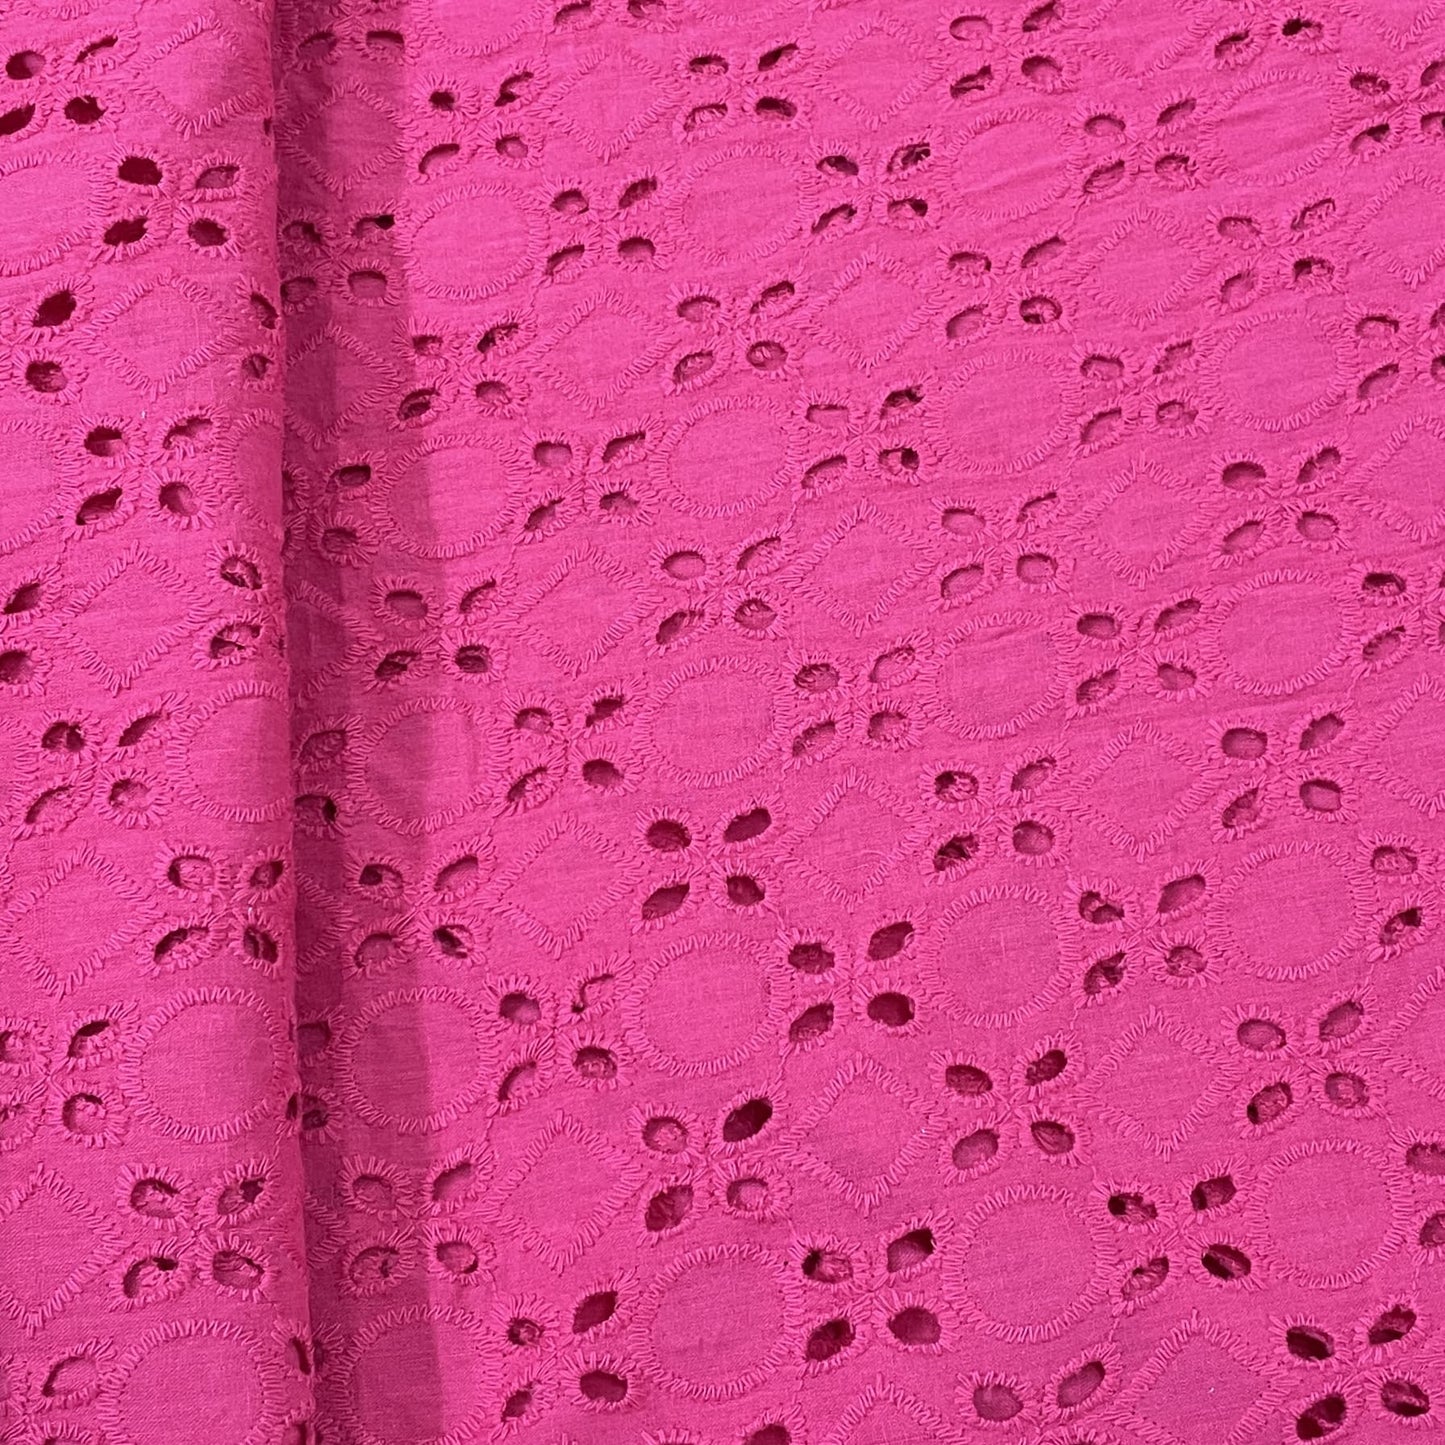 Classic Hot Pink Floral Embroidery Cotton Schiffli Fabric